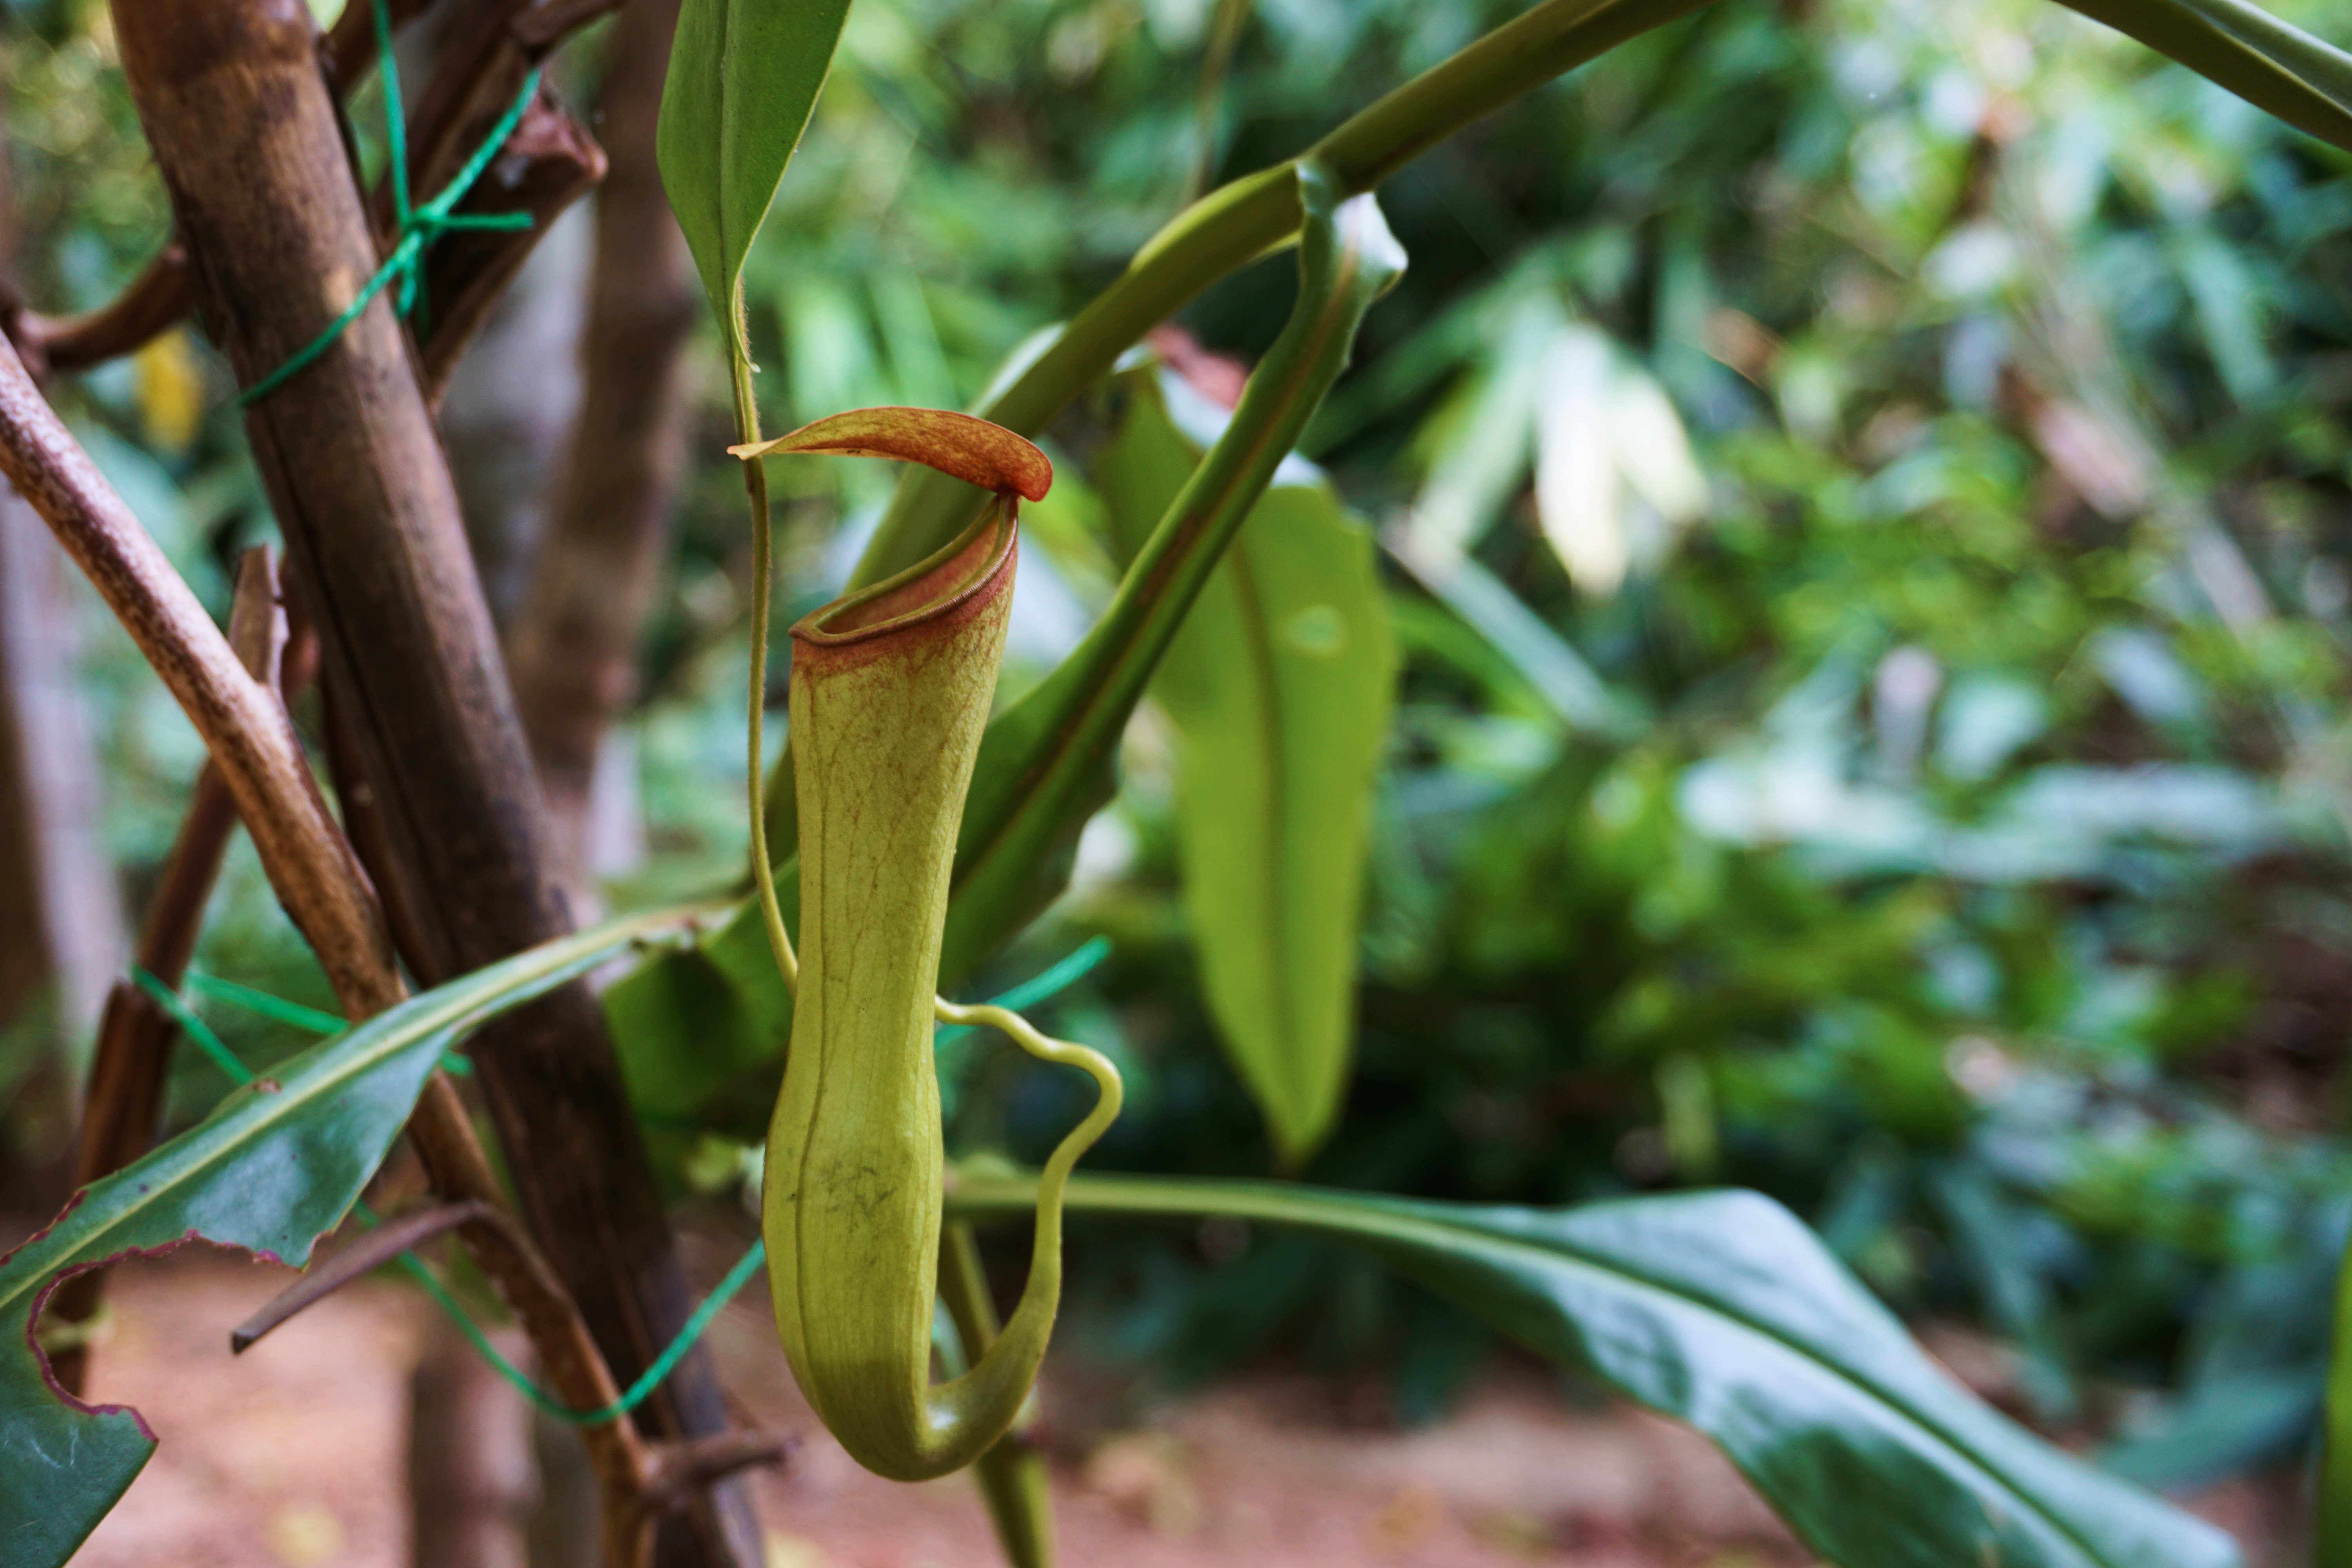 Nepenthes Tenax Wallpaper Image Photos Pictures Background